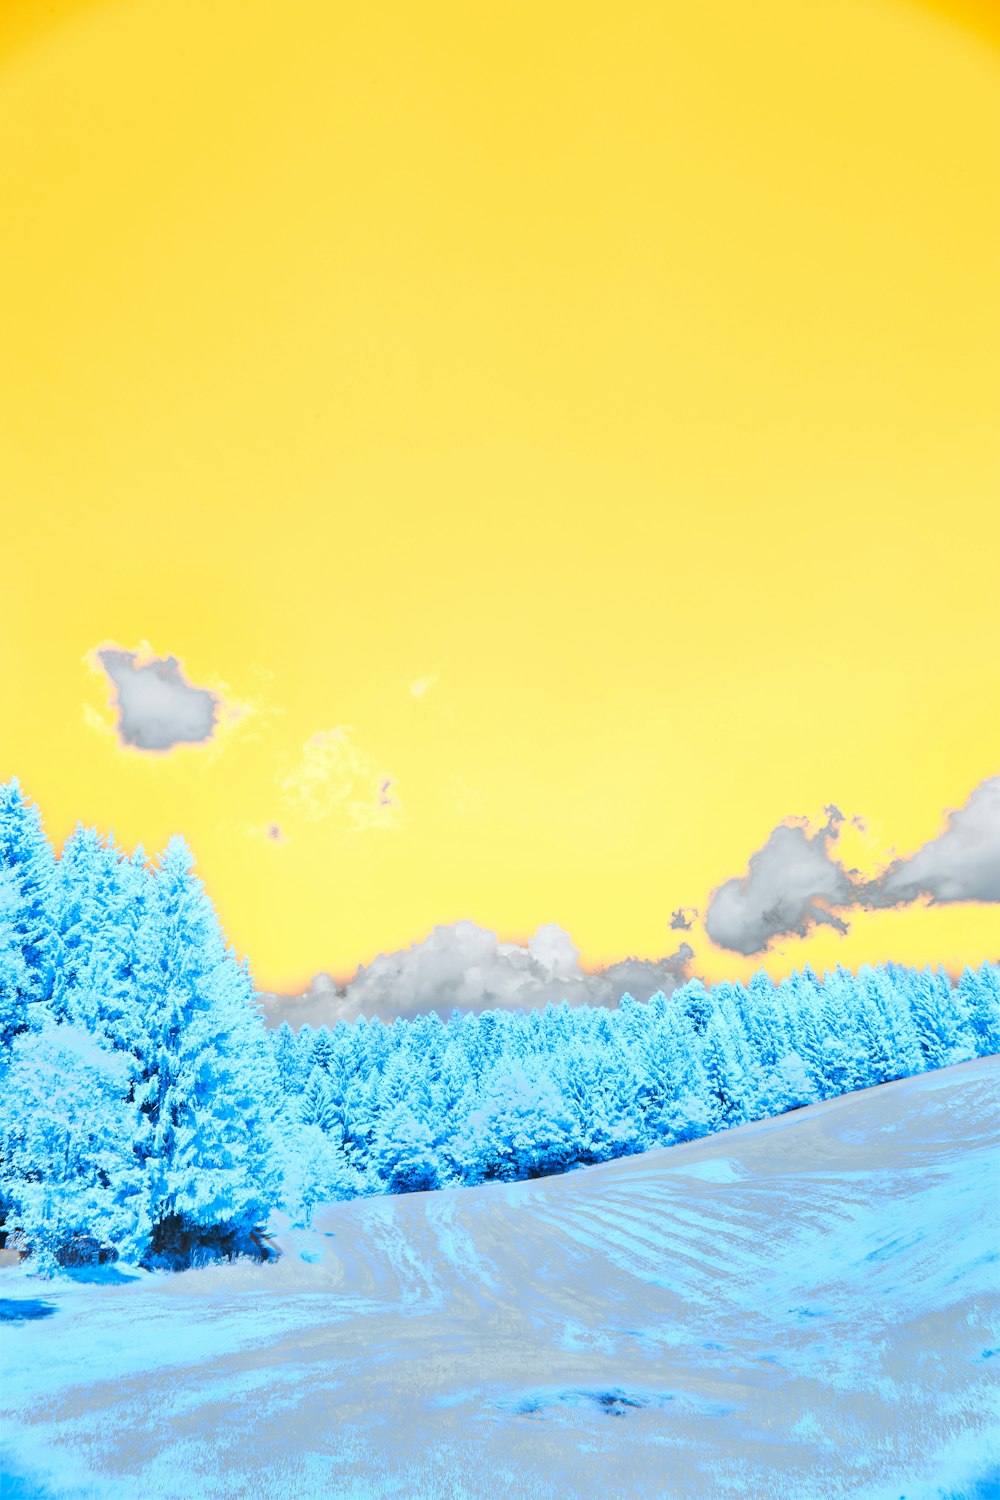 a snow covered field with trees under a yellow sky